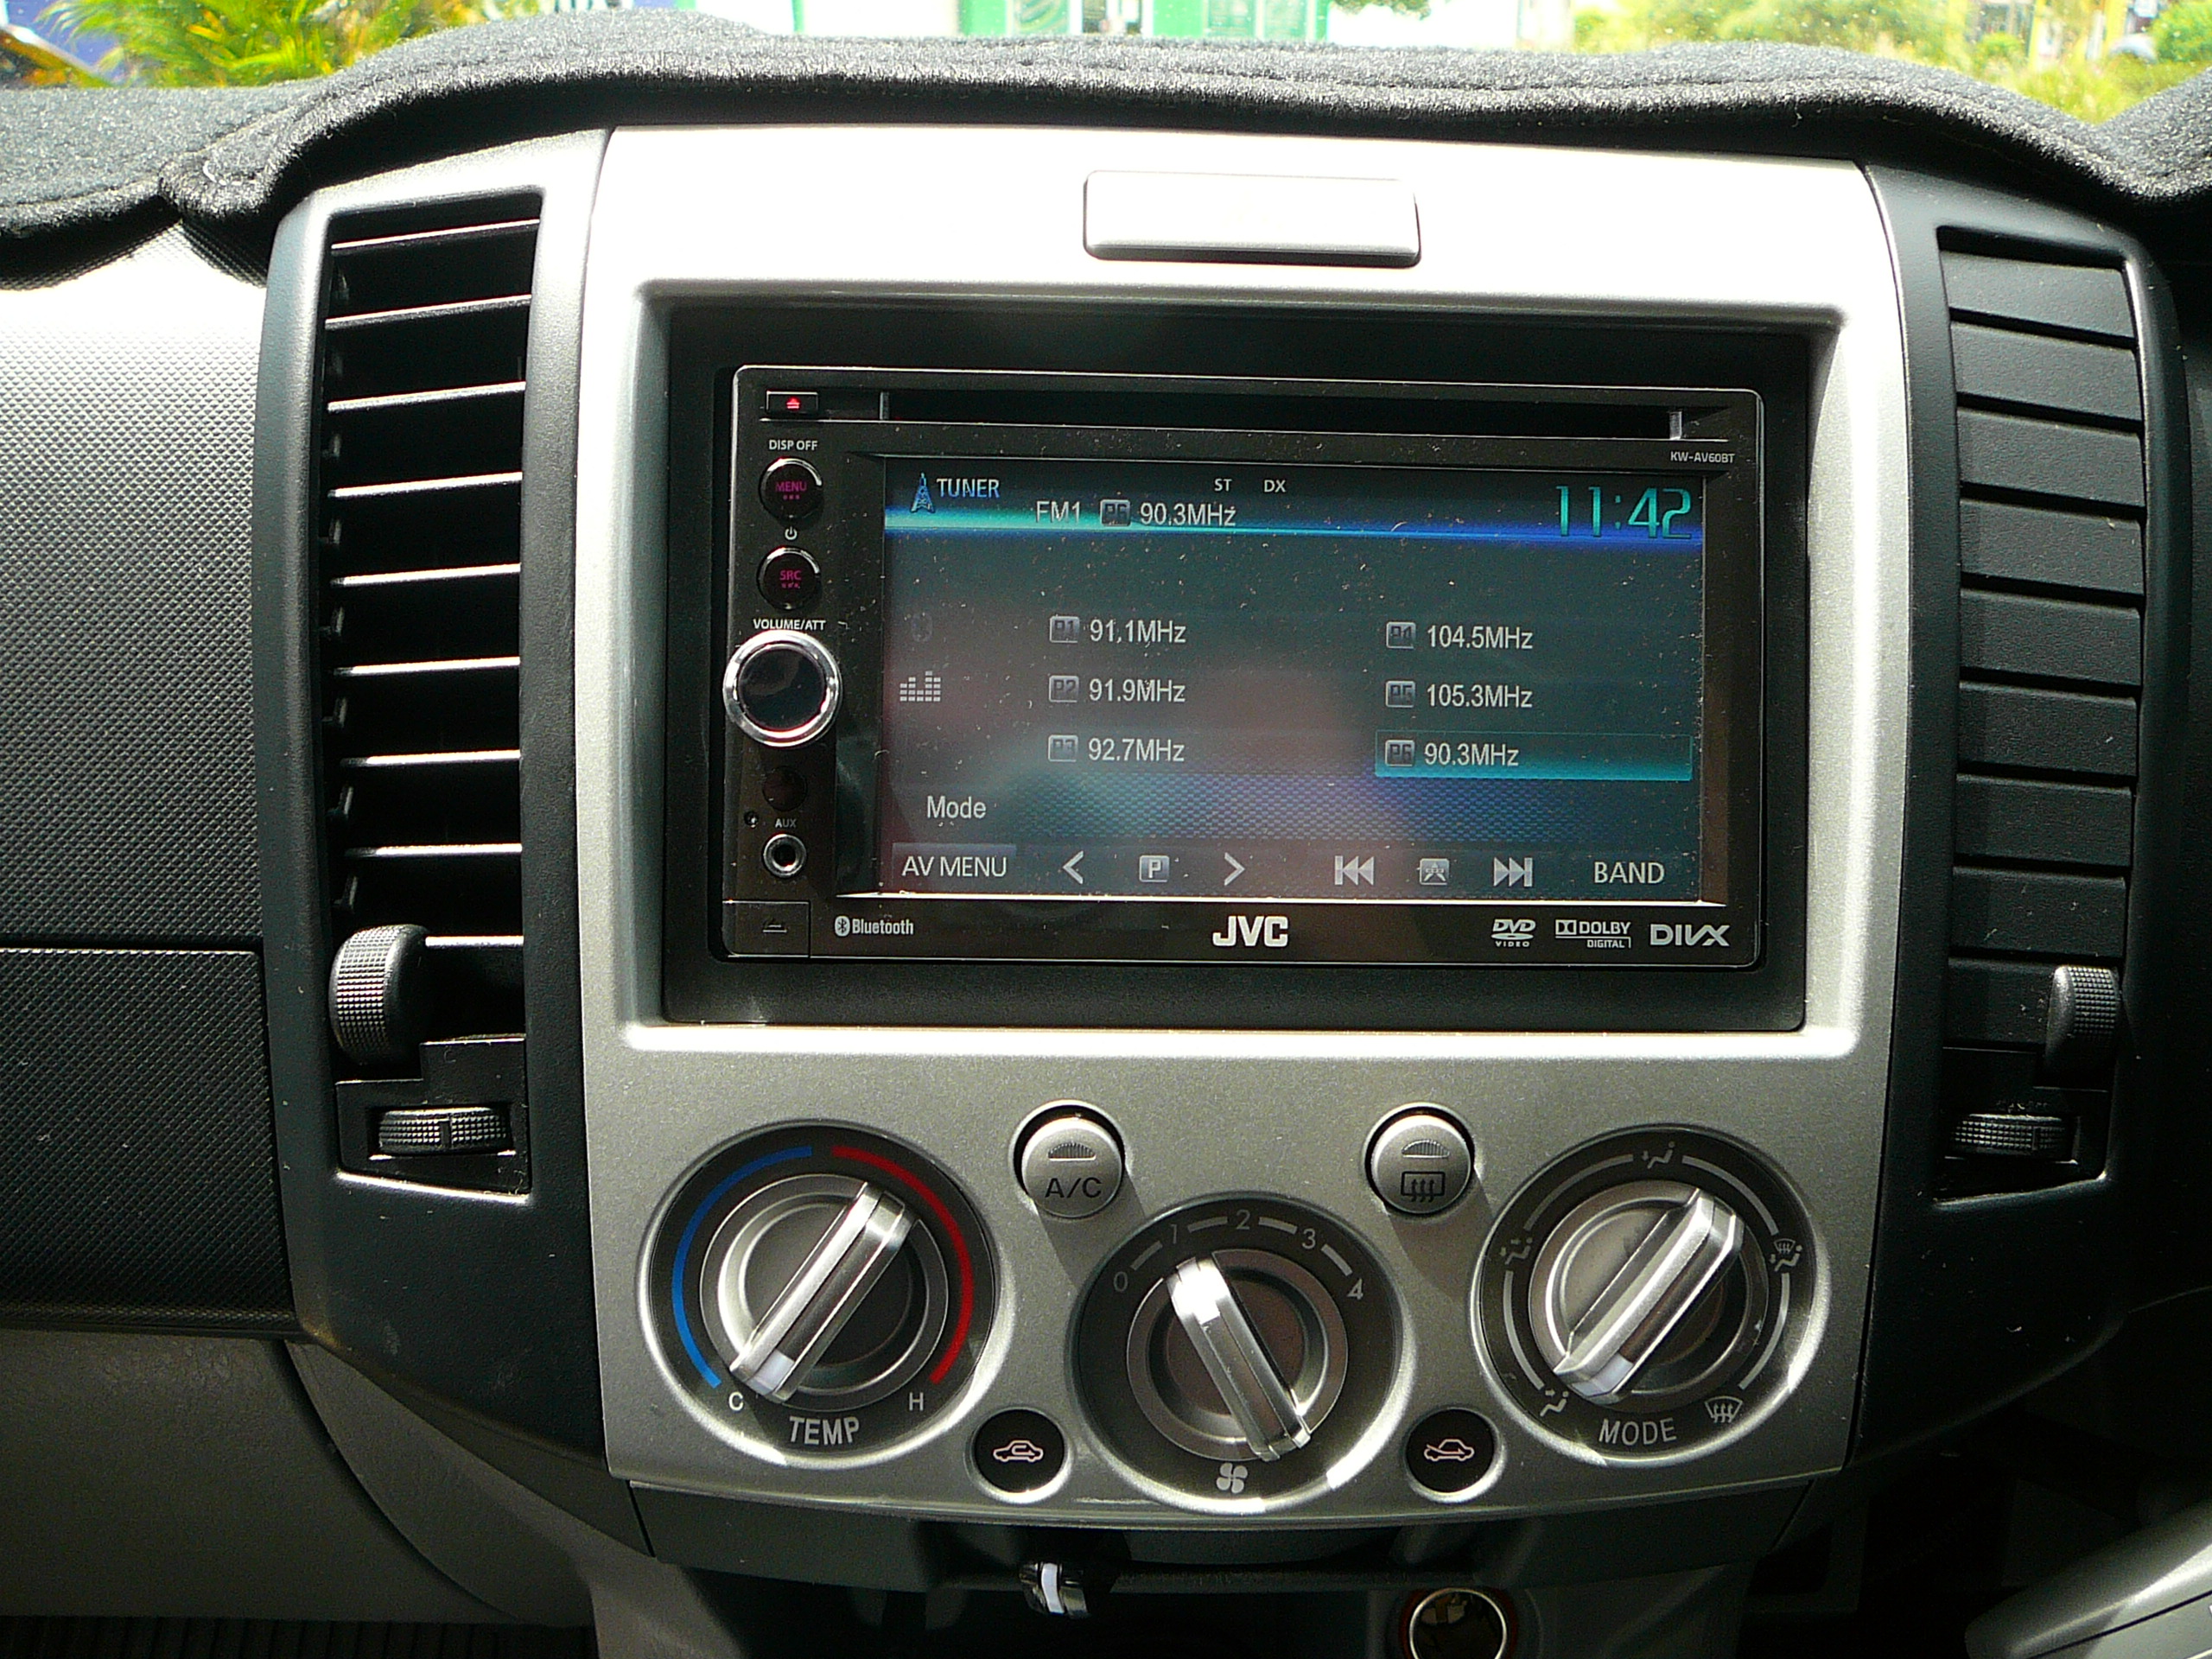 Mazda BT-50 2010, JVC Multimedia Unit with Ipod Control and (ERPS) Electronic Rust Prevention System